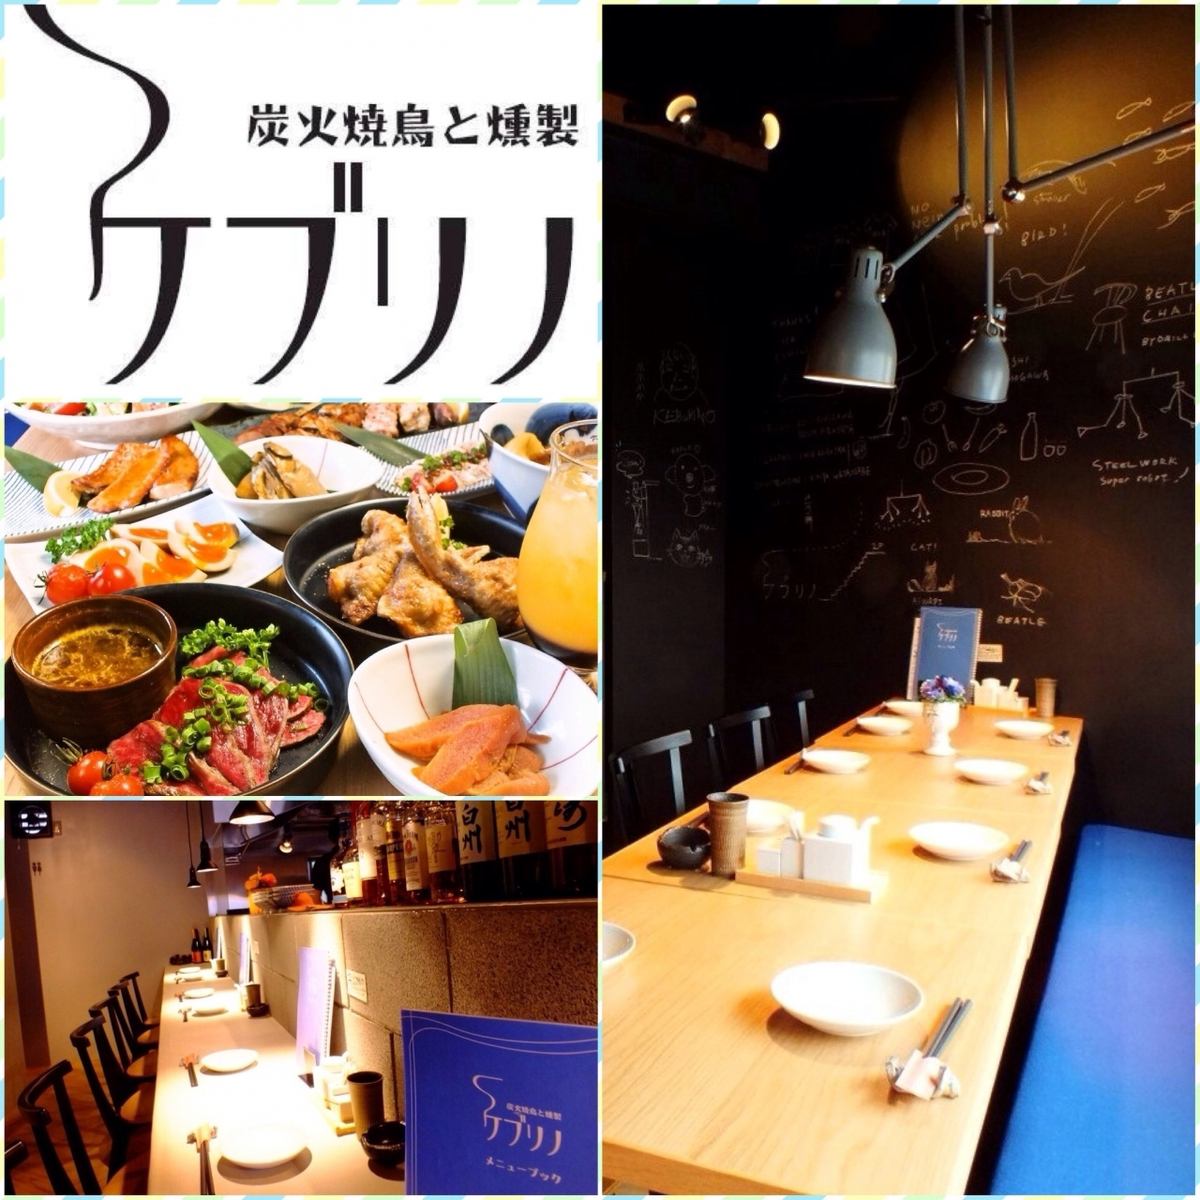 "Shop of charcoal-grilled yakitori and handmade smoked" ☆ Adult retreat in the station 3 minutes walk ♪ The variety of alcohol is also abundant!